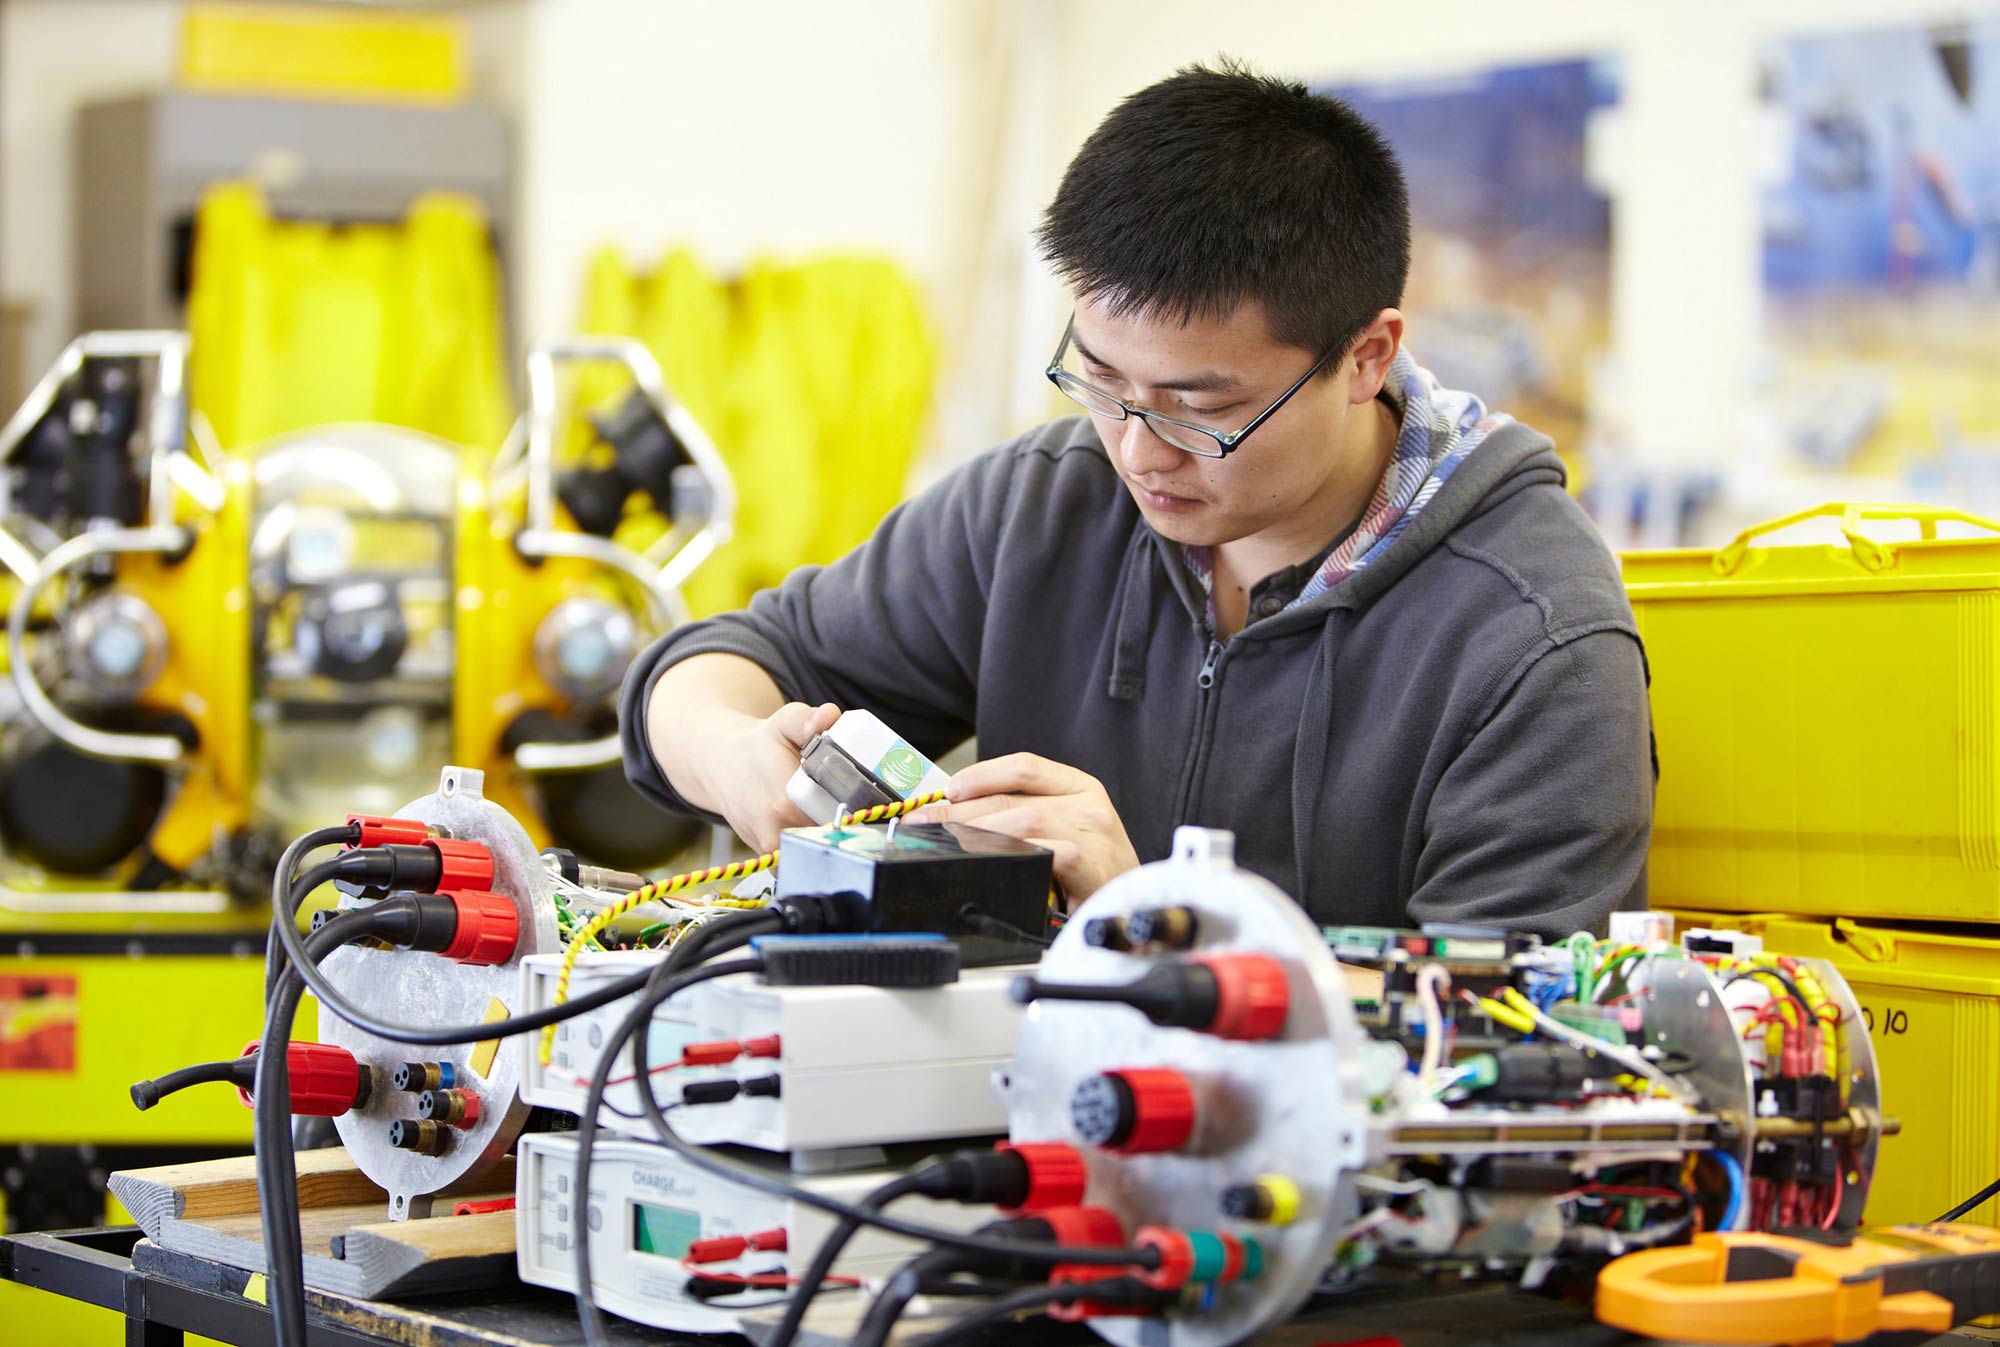 Student with engineering equipment